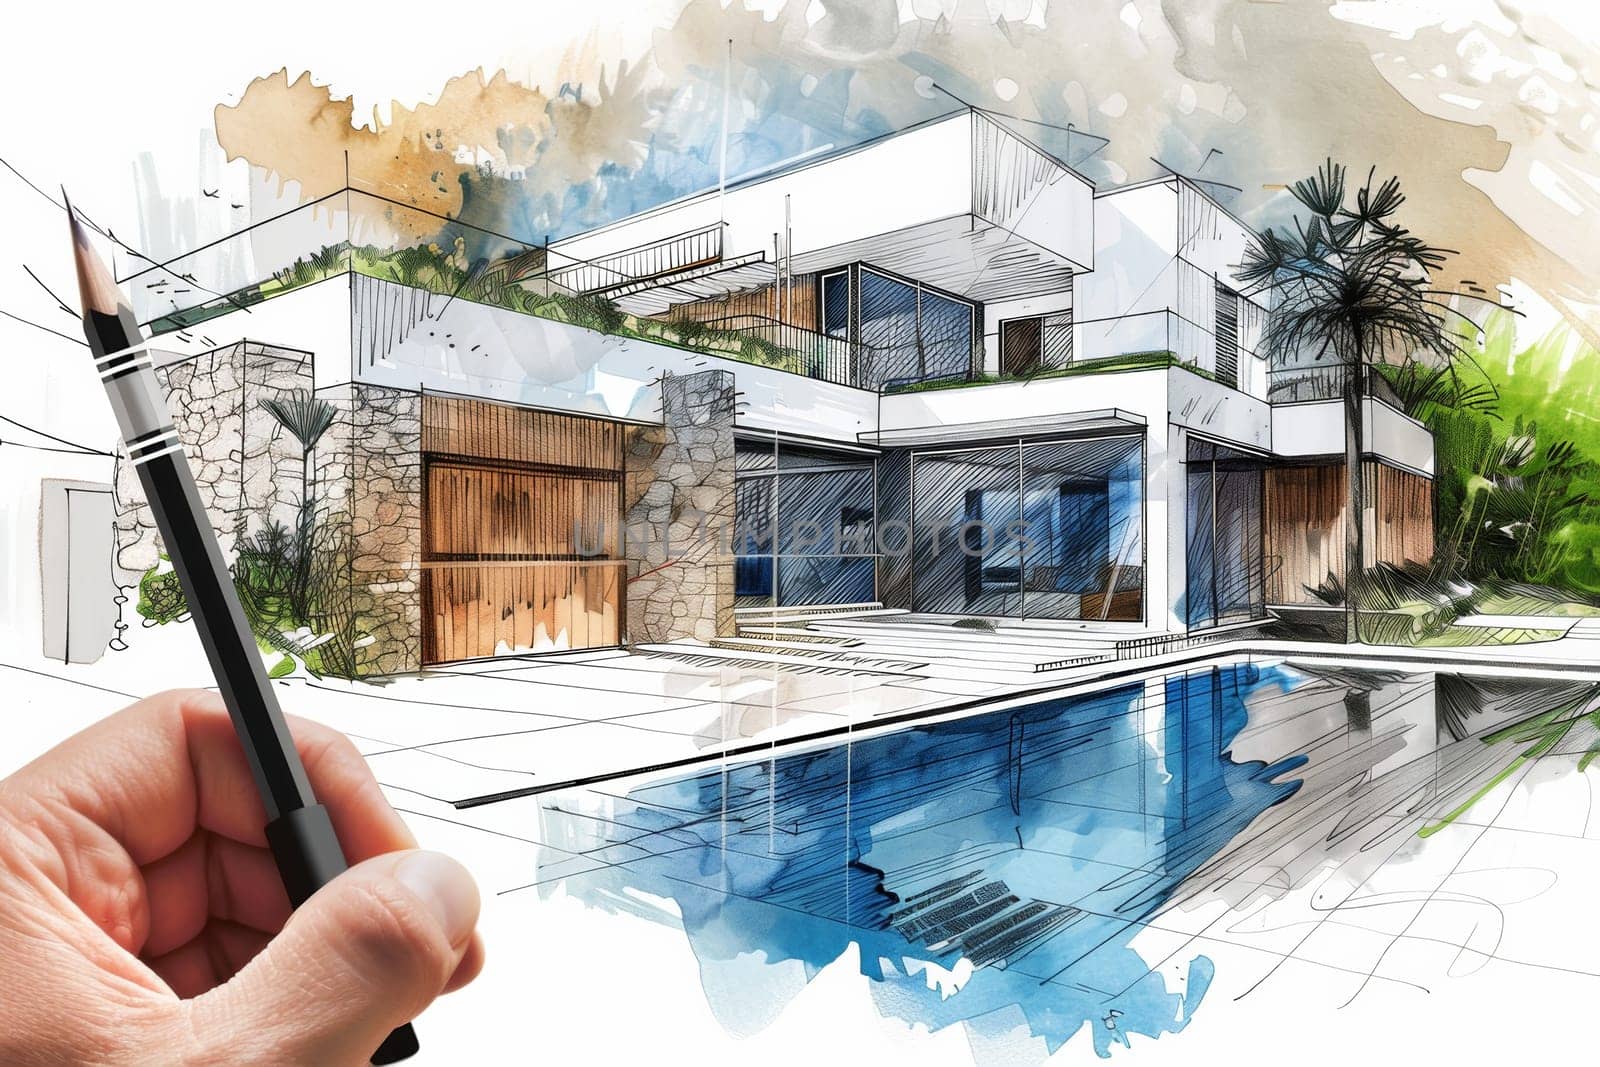 A hand-drawn depiction of a charming house with a crystal-clear pool in front, creating a serene and luxurious oasis in the midst of architectural wonder.